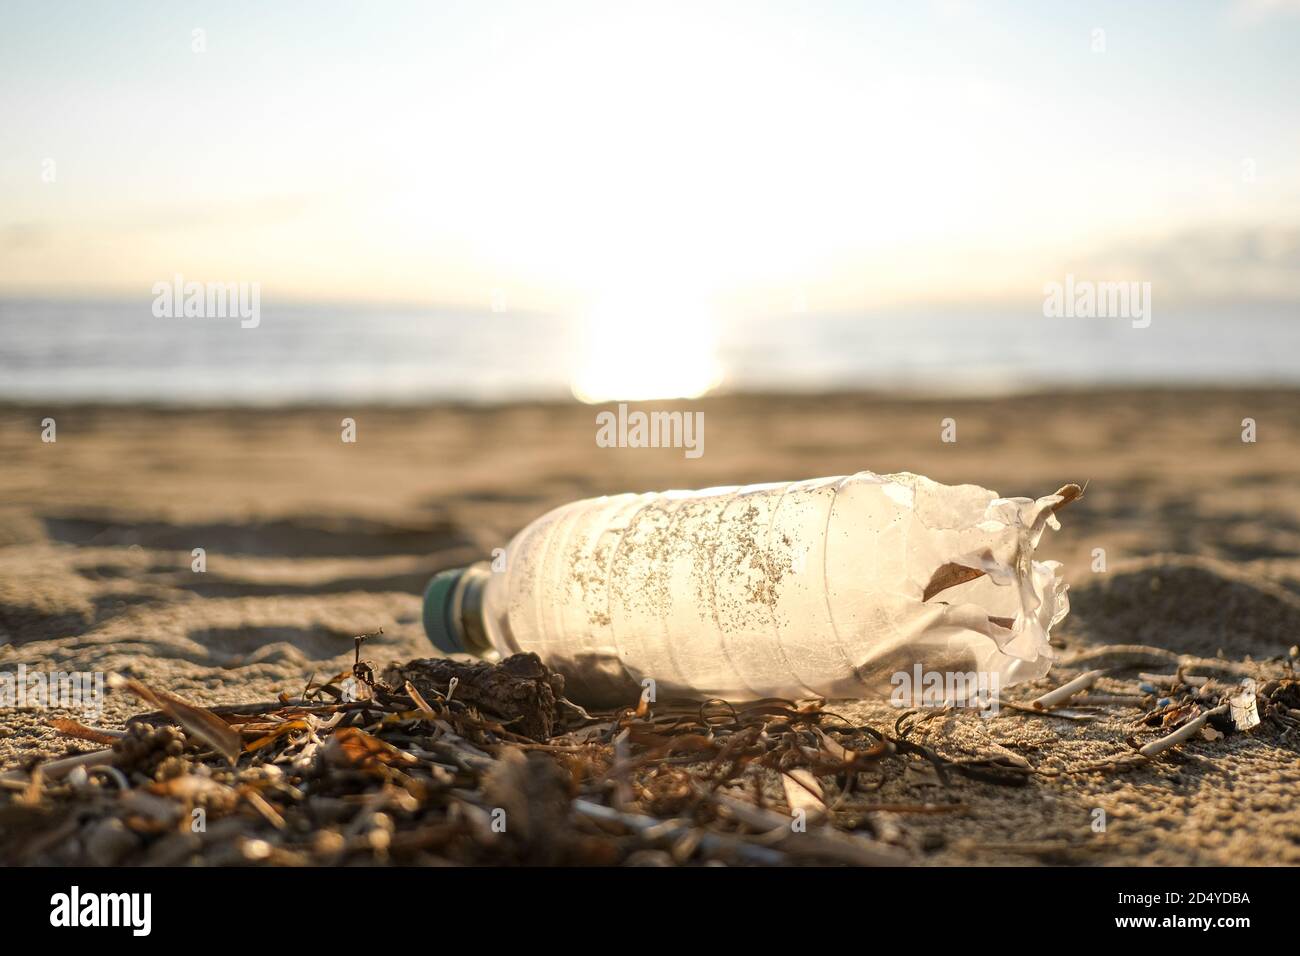 Plastic bottle trash discarded on sea coast ecosystem,environmental pollution issues Stock Photo